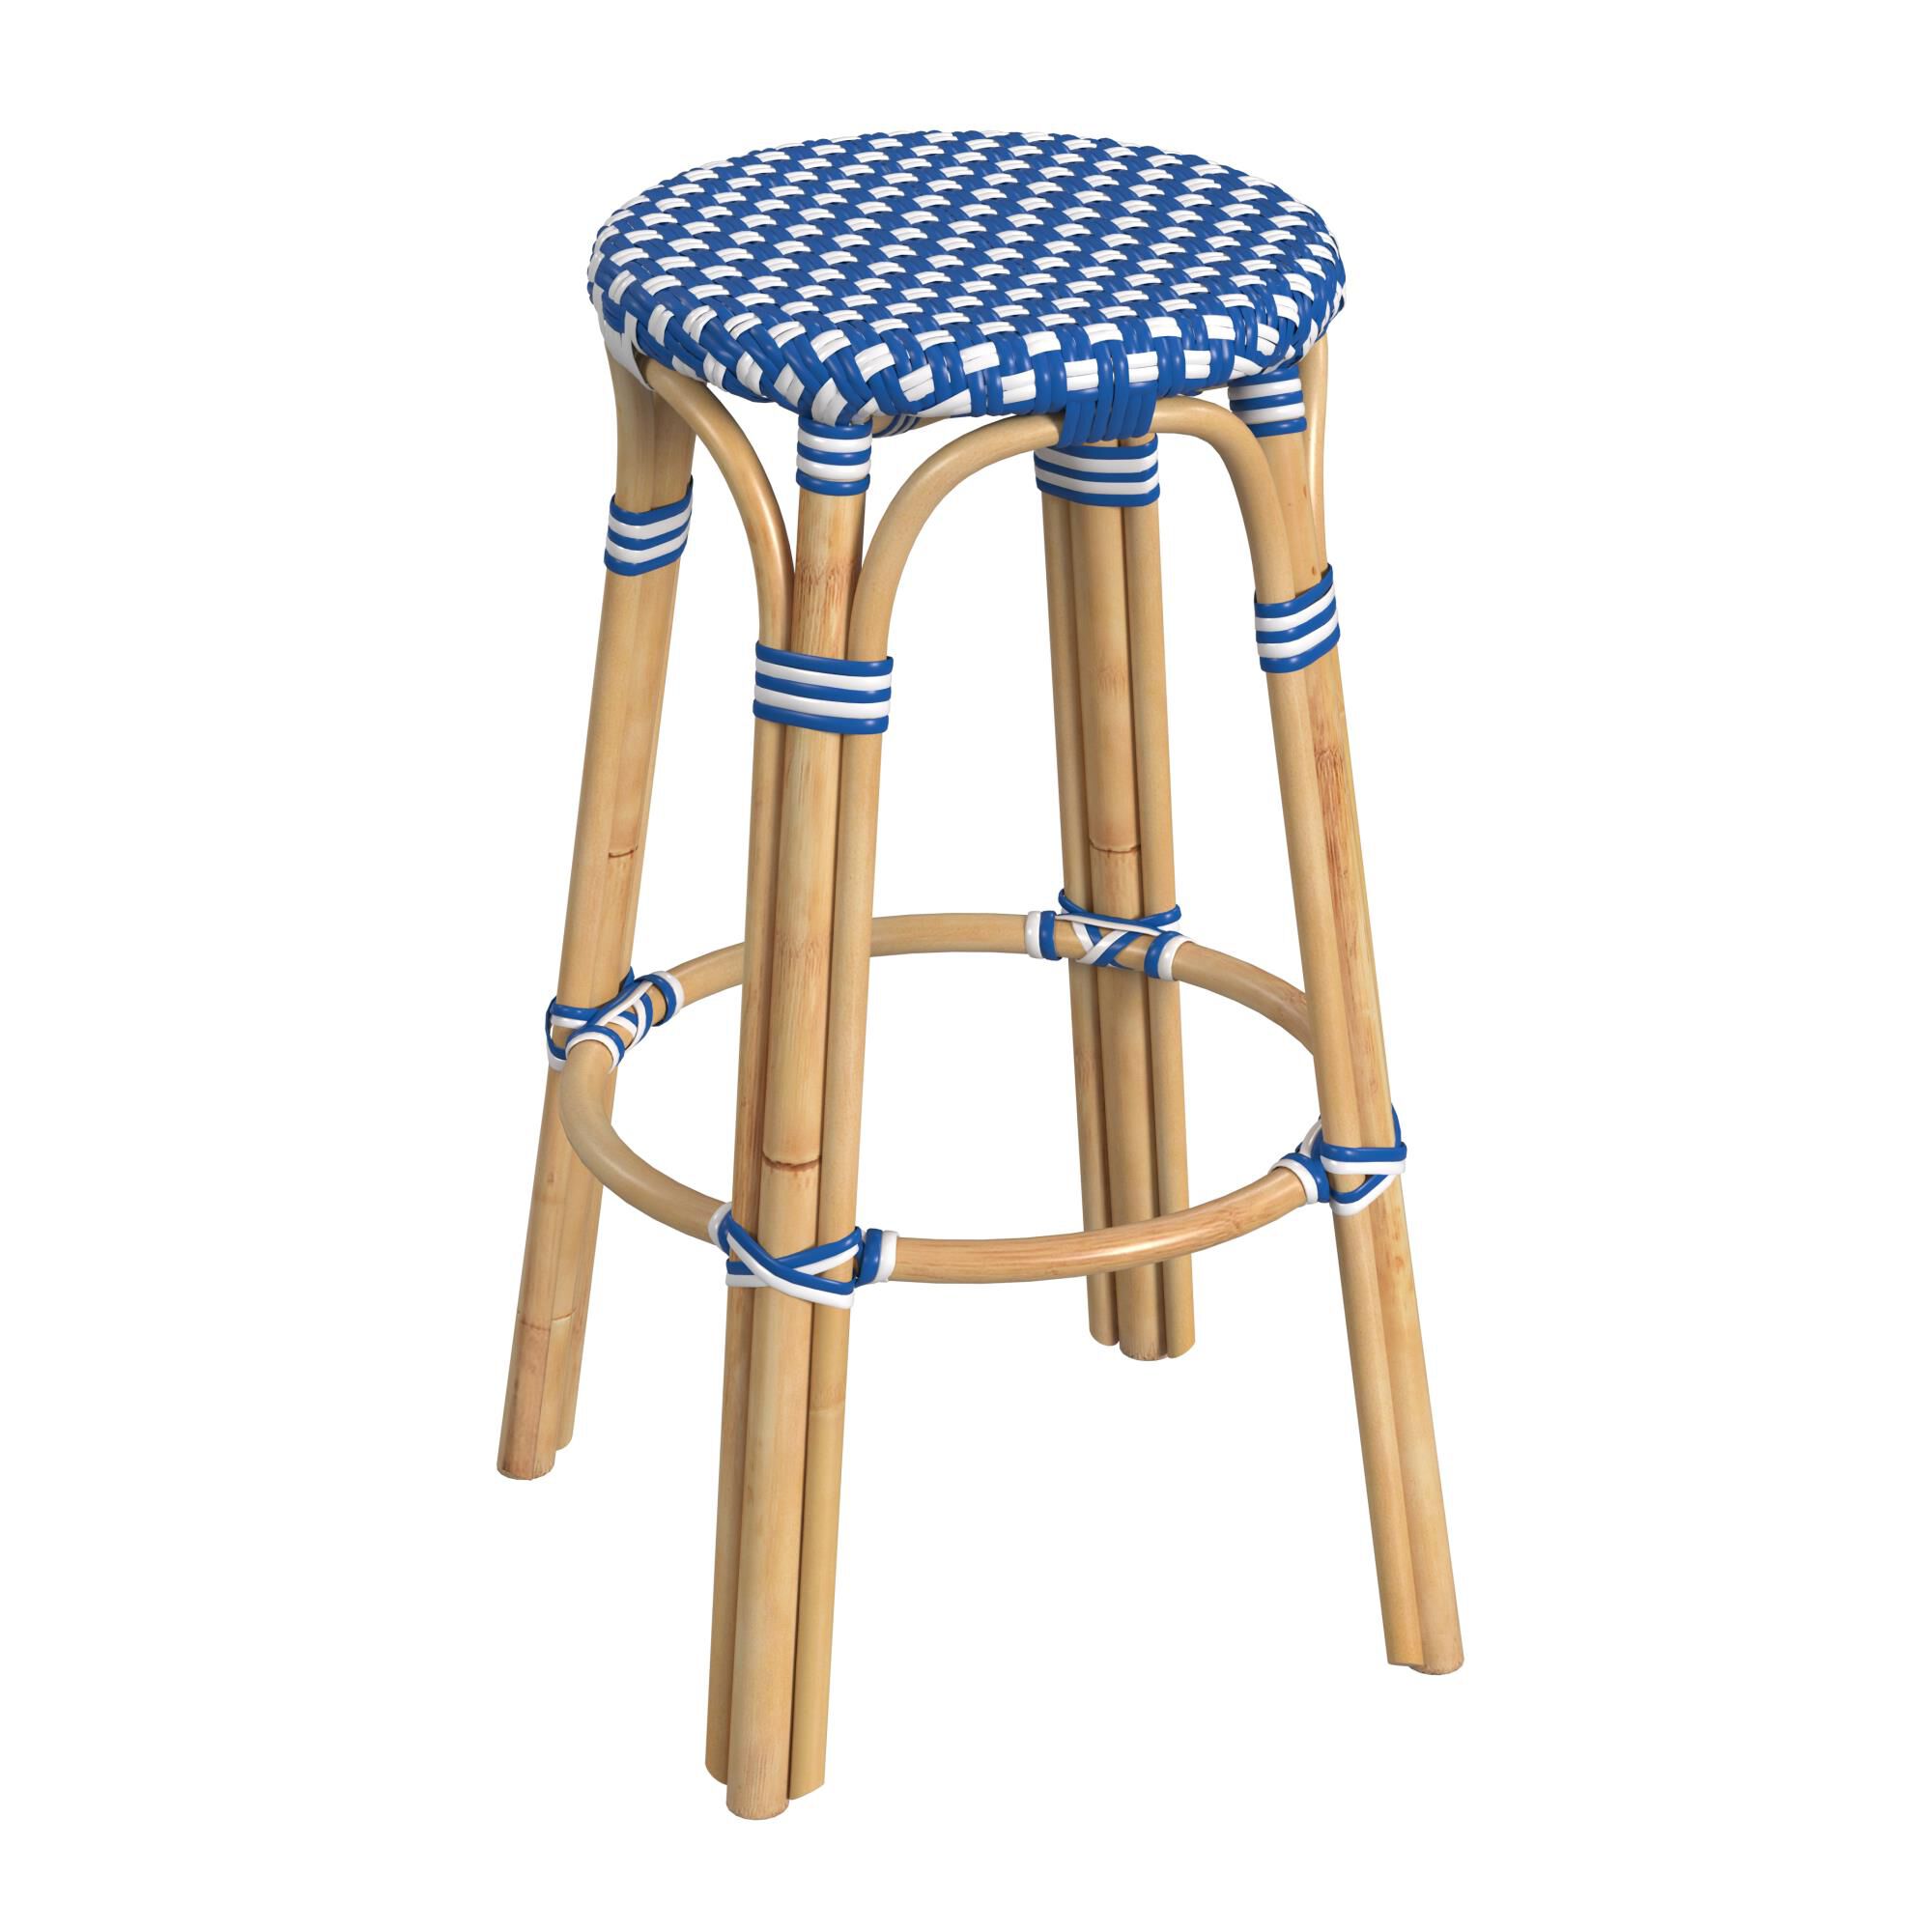 Photos - Chair Butler Specialty Company Tobias Stool Tobias - 9370303 - Transitional 9370